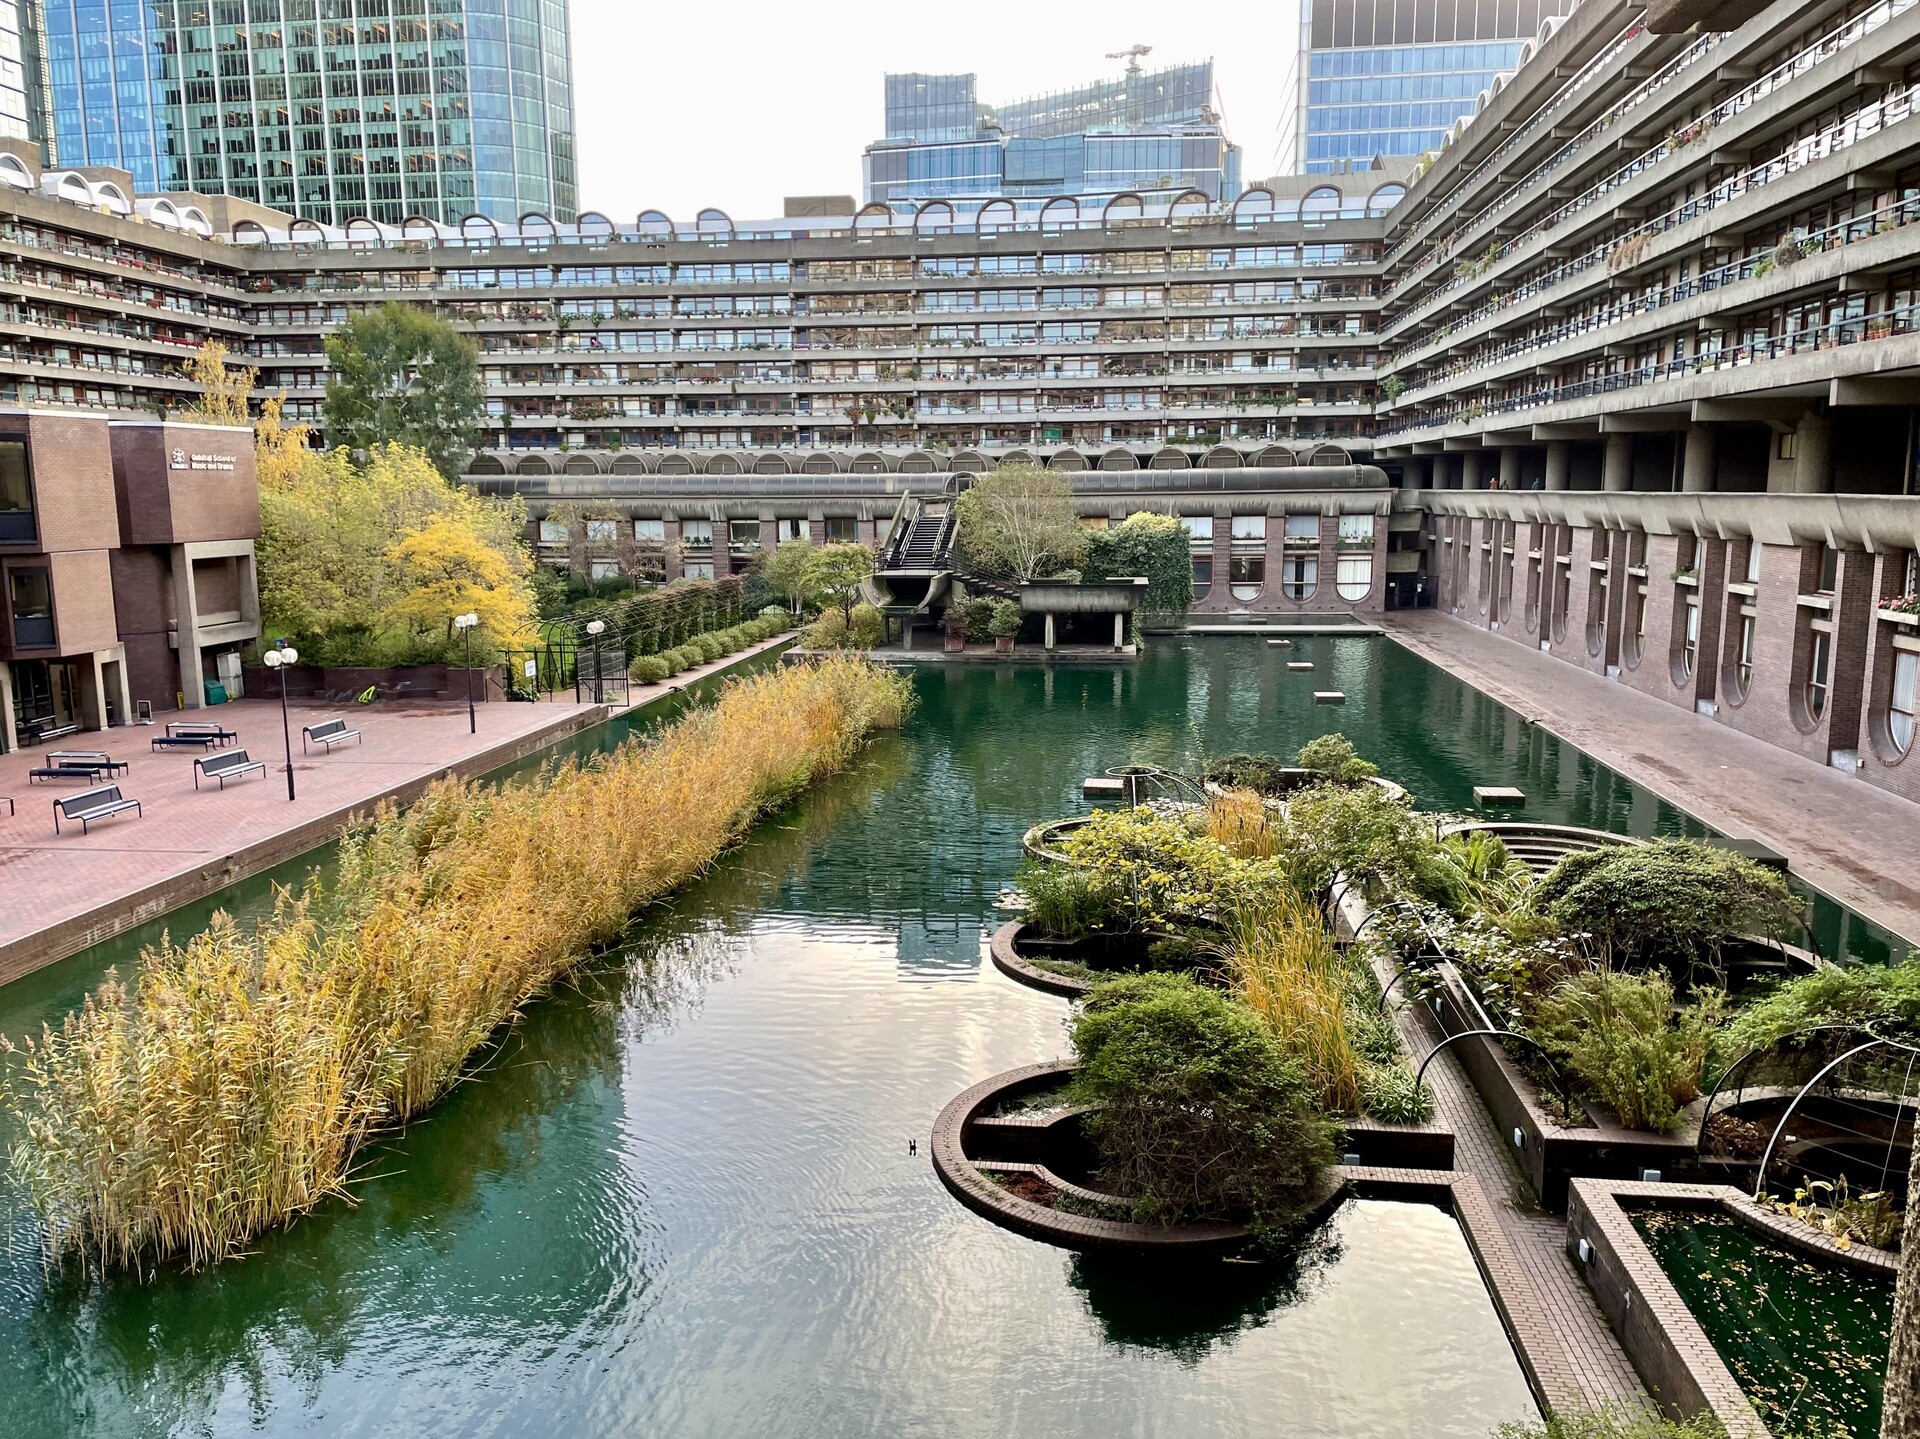 The lake at the centre of the Barbican Centre, with the brutal concrete buildings all around and hung with greenery.